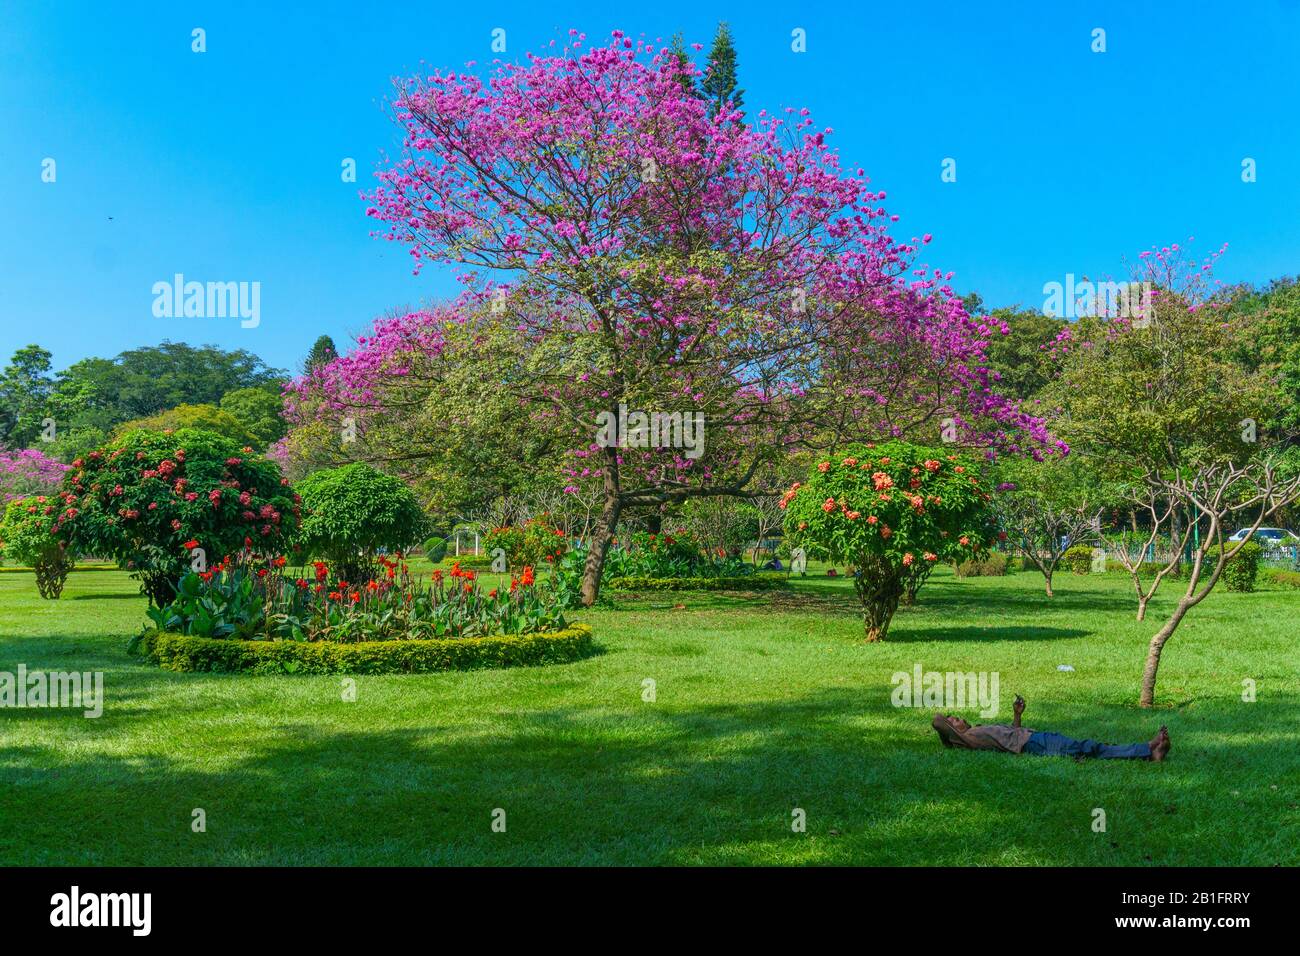 Visitors relaxing in the manicured garden of Cubbon Park in Bangalore (India). A beautiful flowering tree is seen at the background. Stock Photo